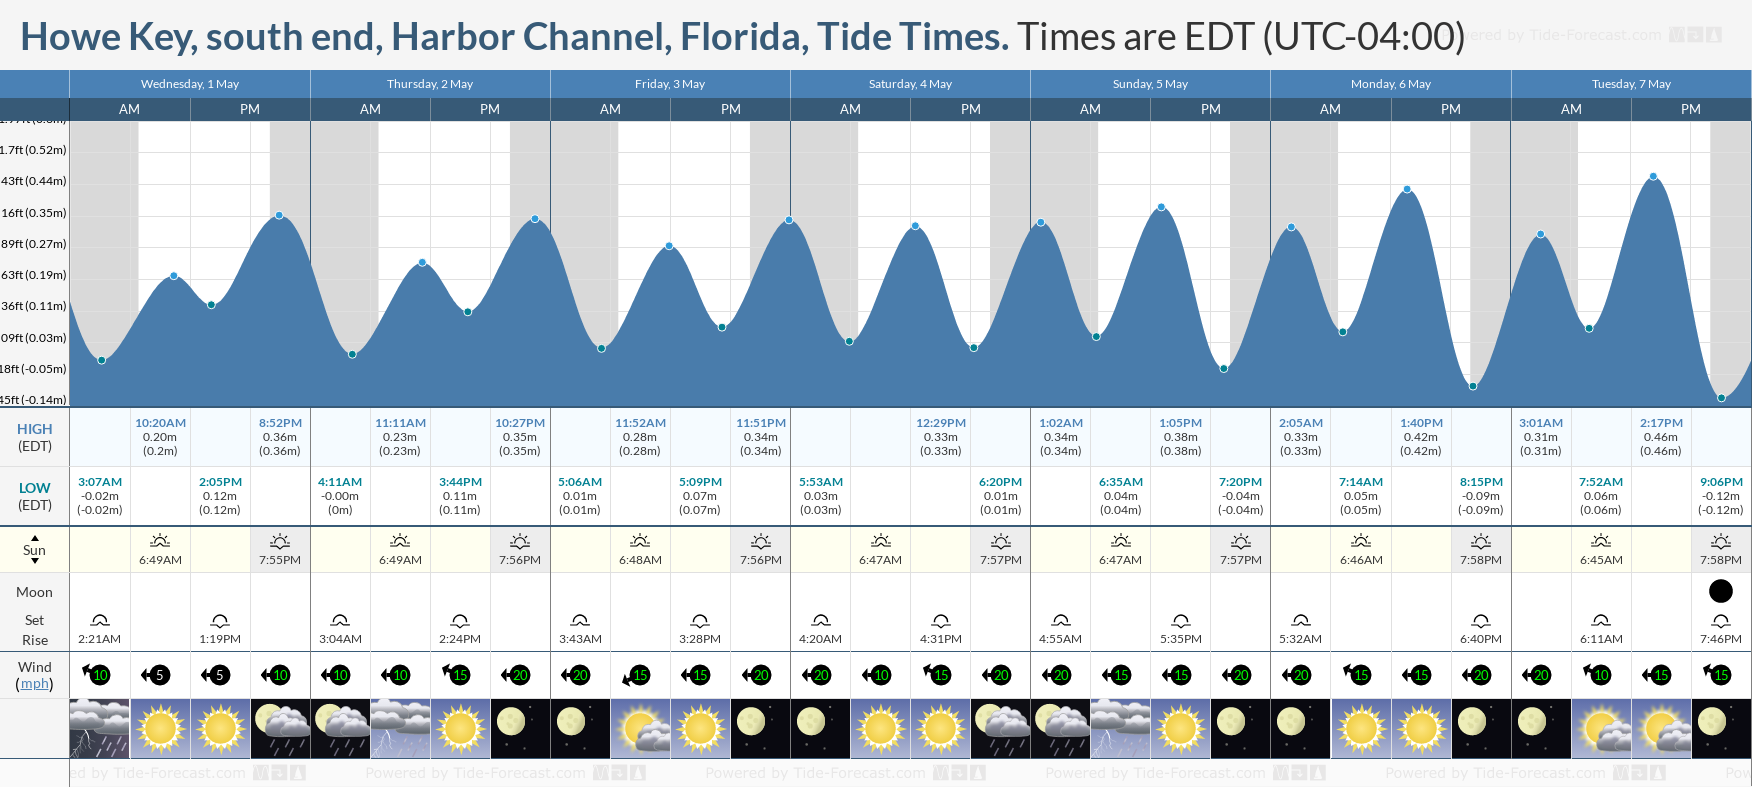 Howe Key, south end, Harbor Channel, Florida Tide Chart including high and low tide times for the next 7 days